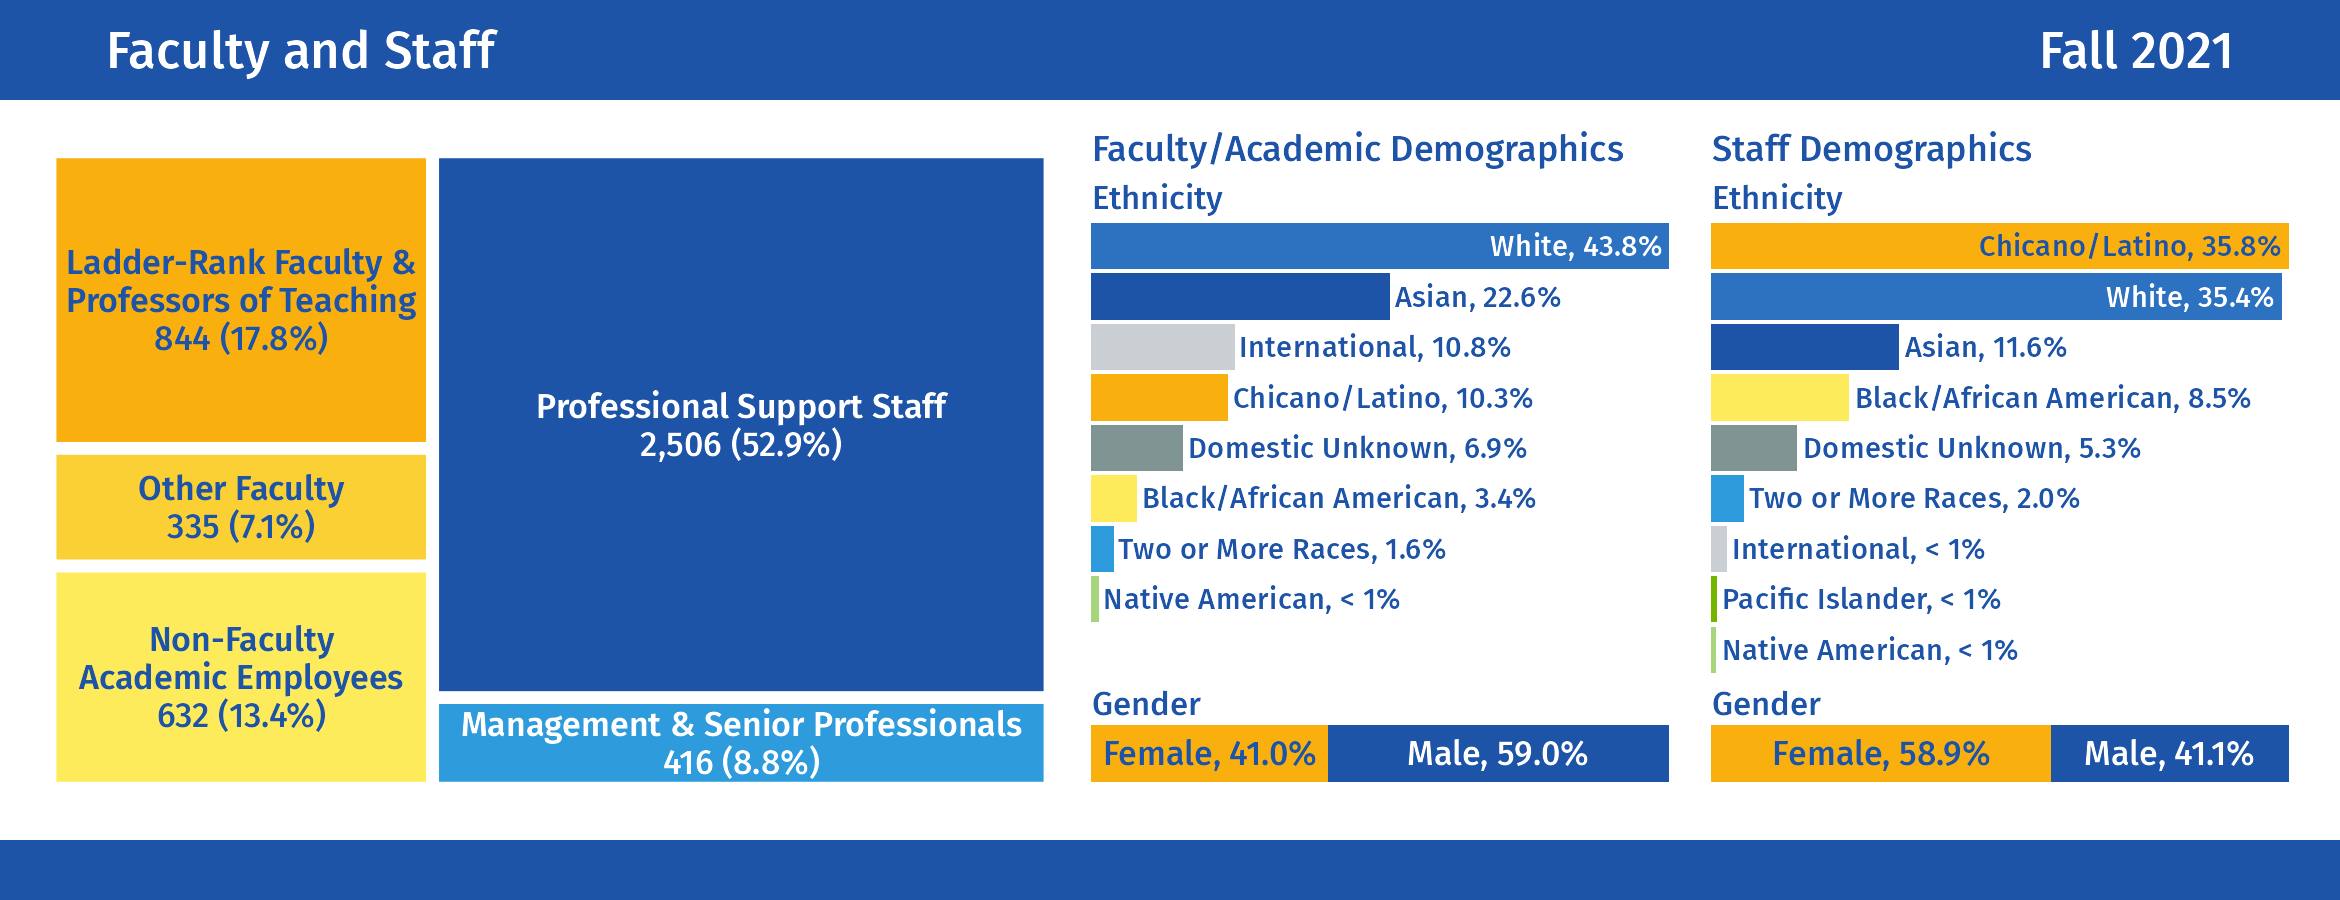 Faculty and Staff: For additional details, click to view our Faculty and Staff dashboards.